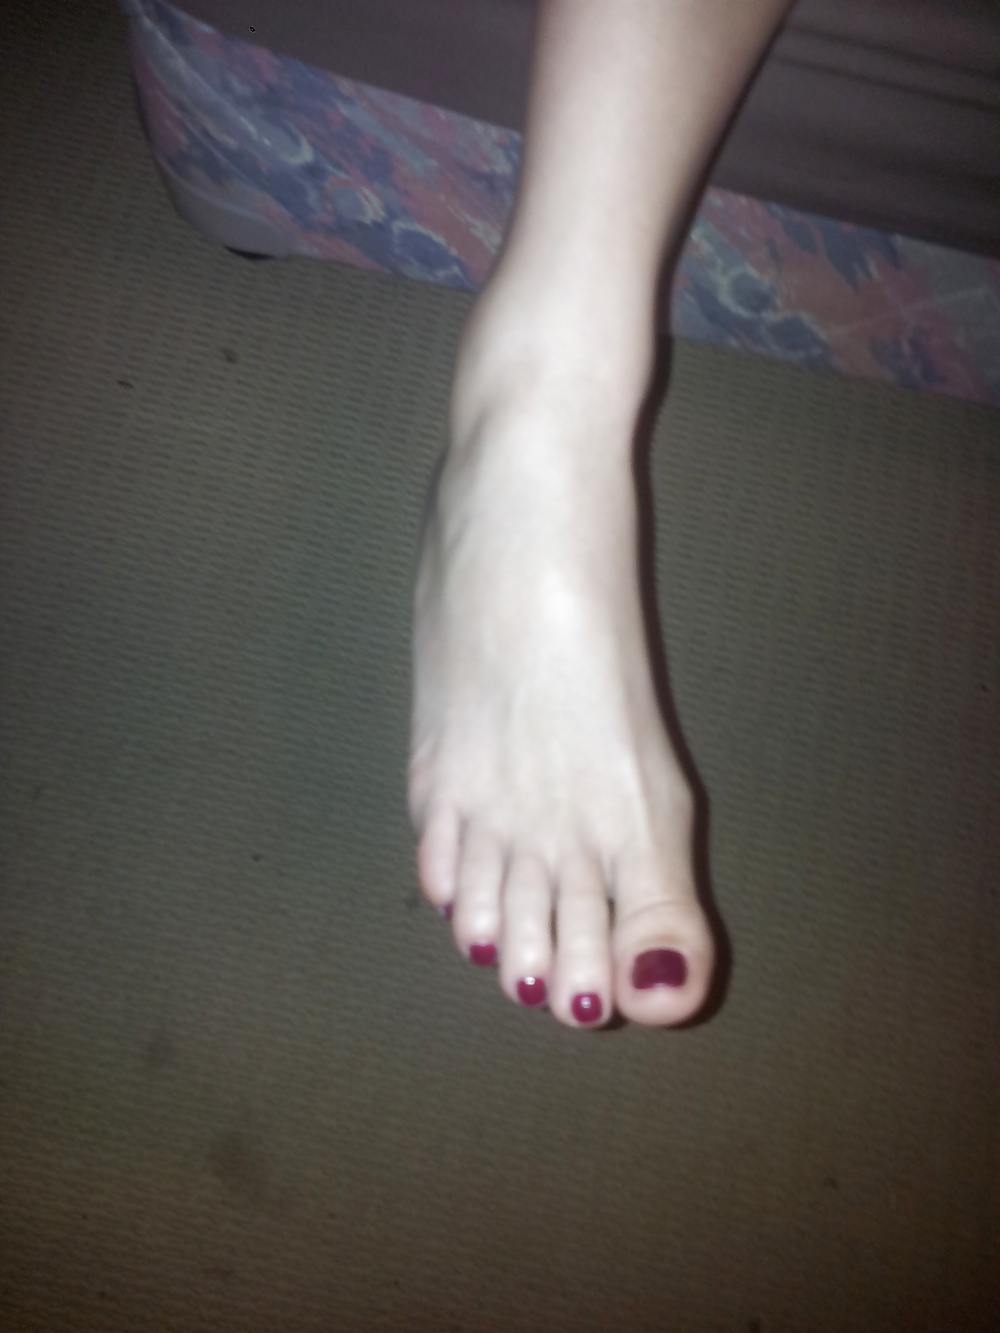 More of my pretty little feet #33654855